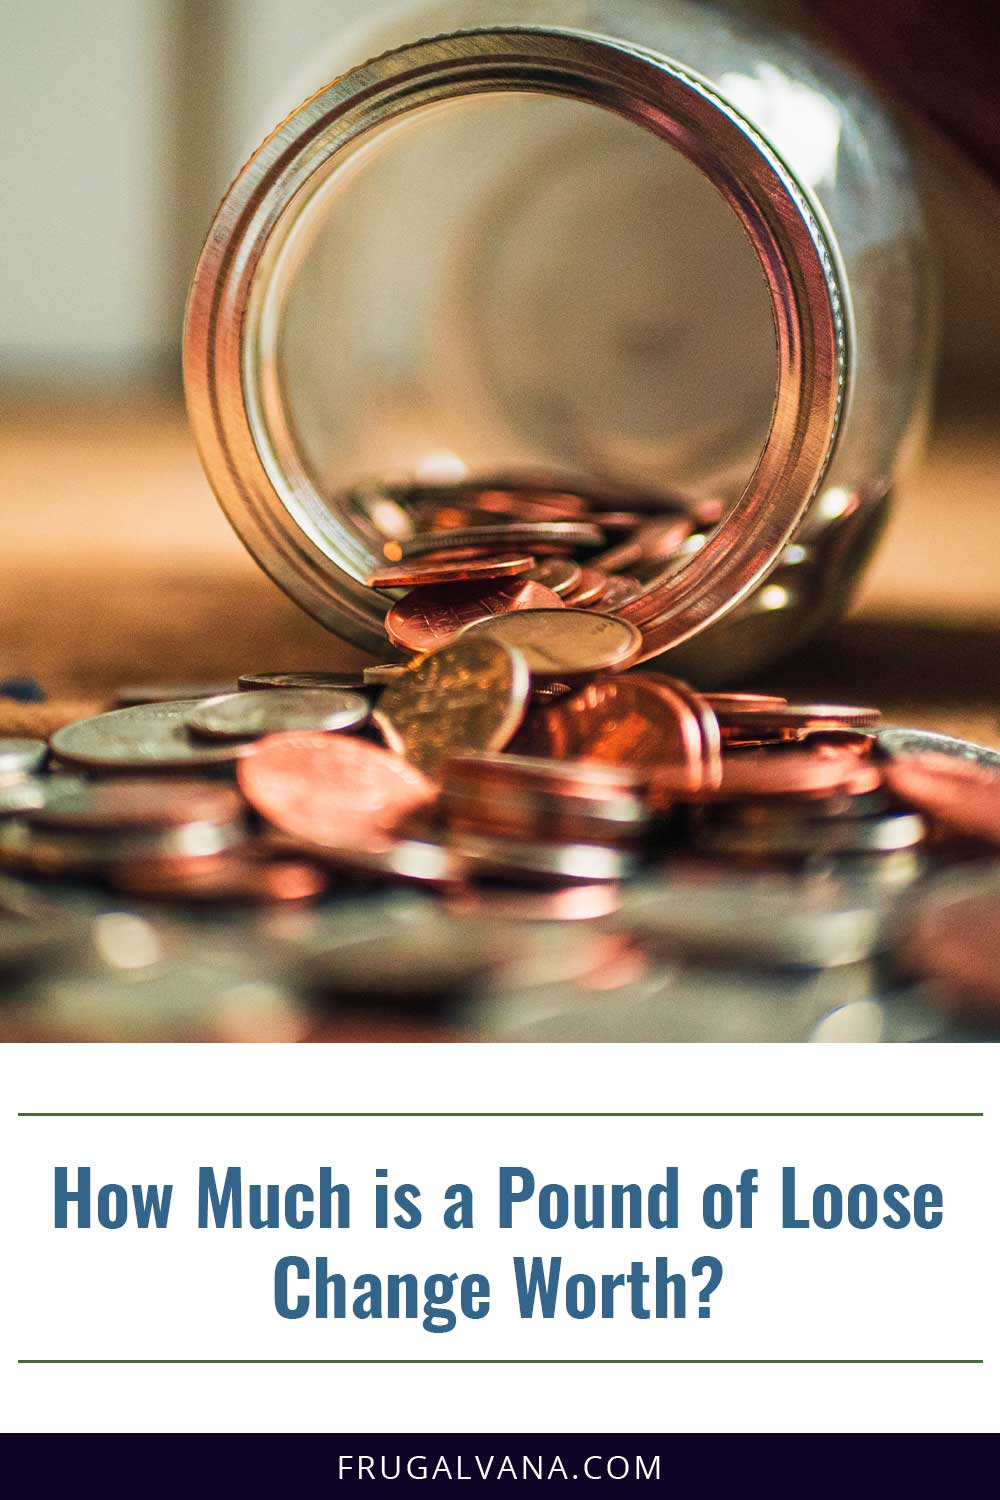 How Much is a Pound of Loose Change Worth?